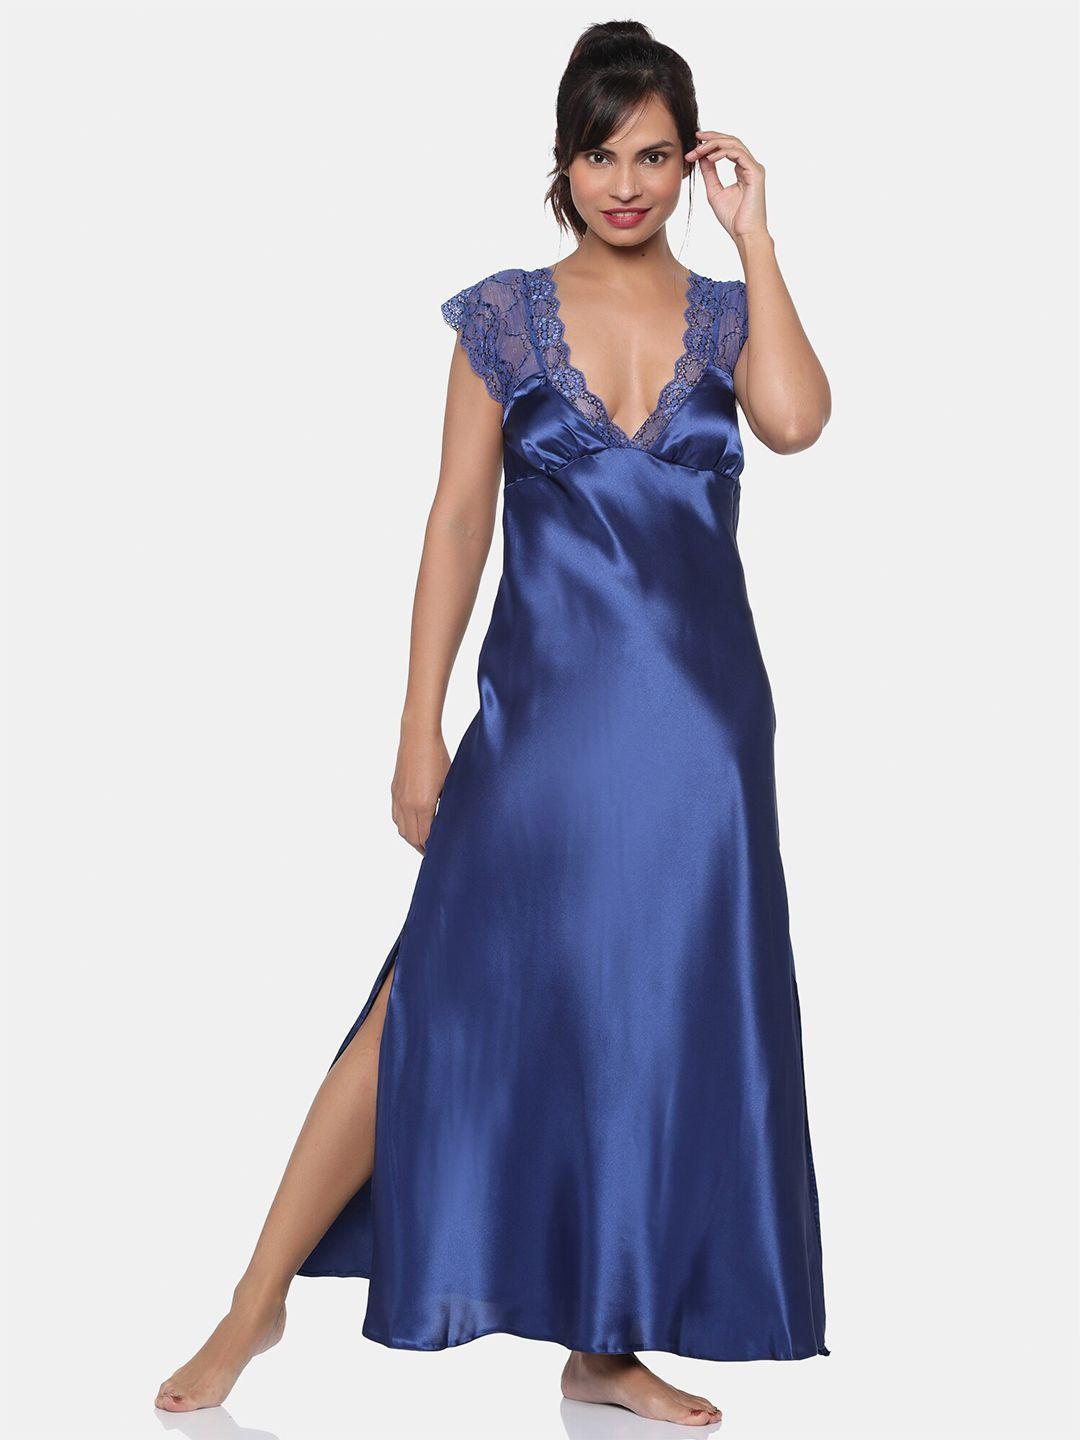 miorre-blue-solid-satin-lacy-nightdress